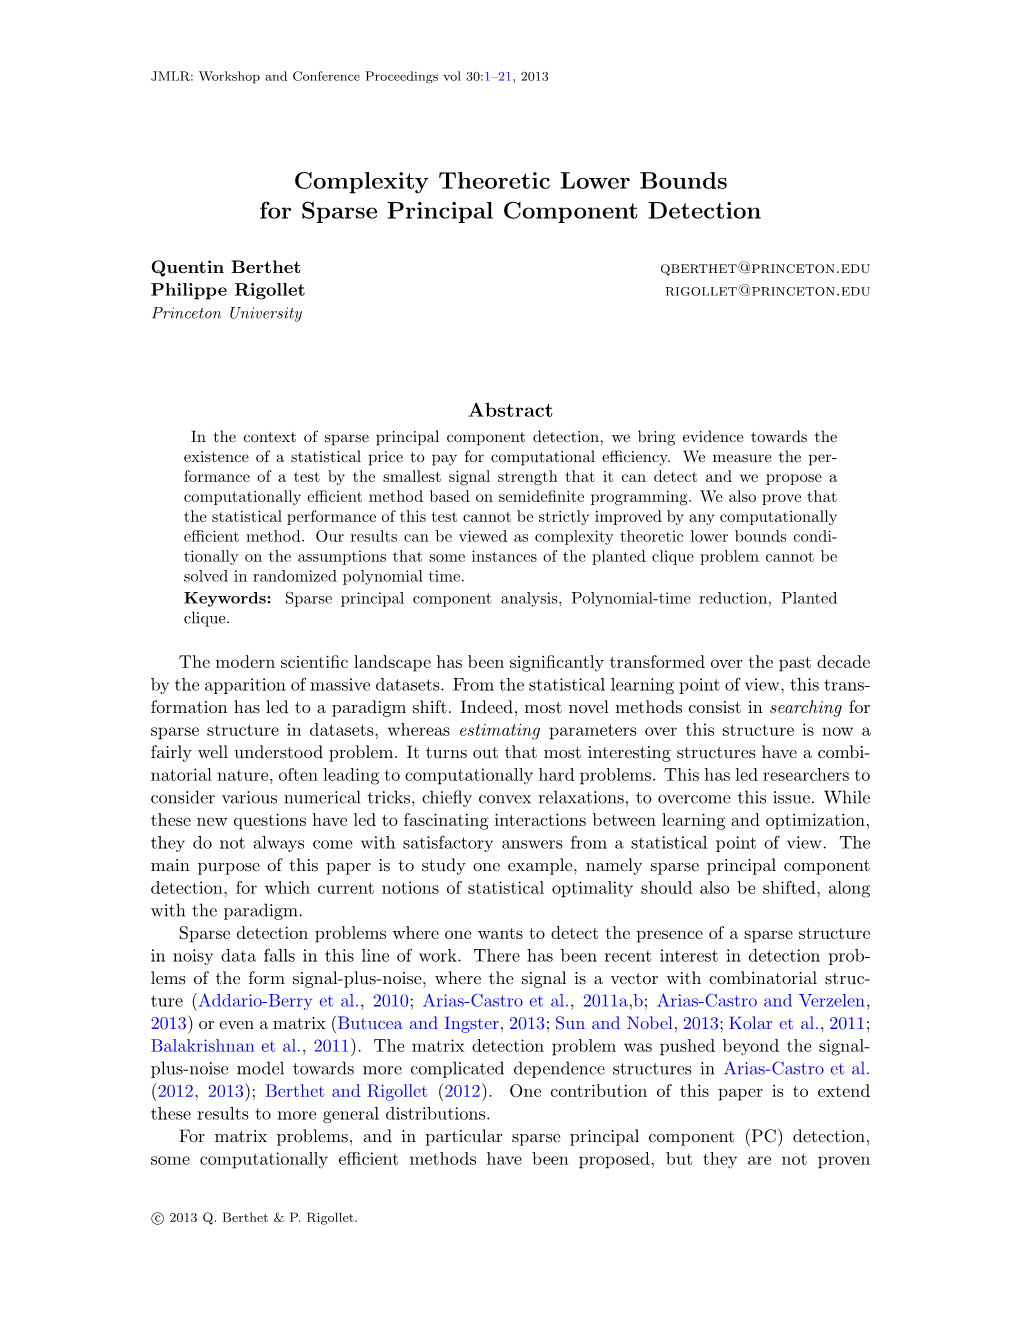 Complexity Theoretic Lower Bounds for Sparse Principal Component Detection